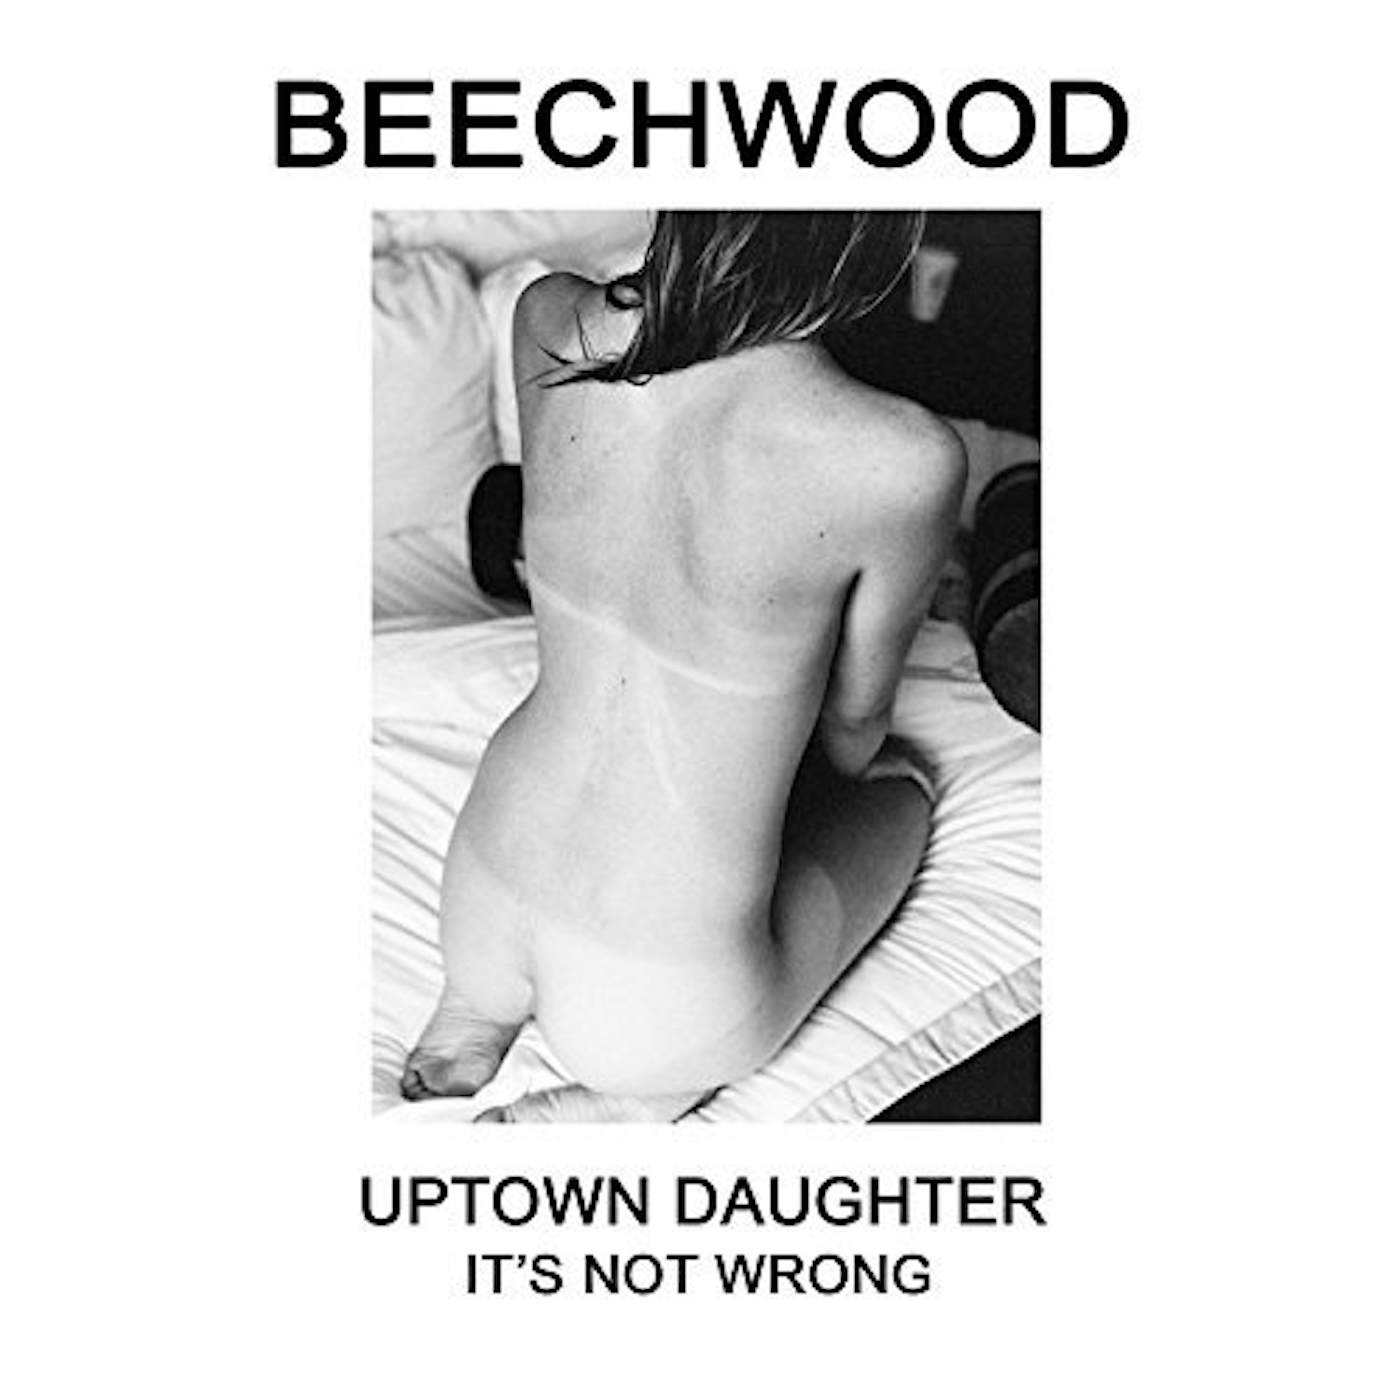 Beechwood ITS NOT WRONG B/W UPTOWN DAUGHTER Vinyl Record